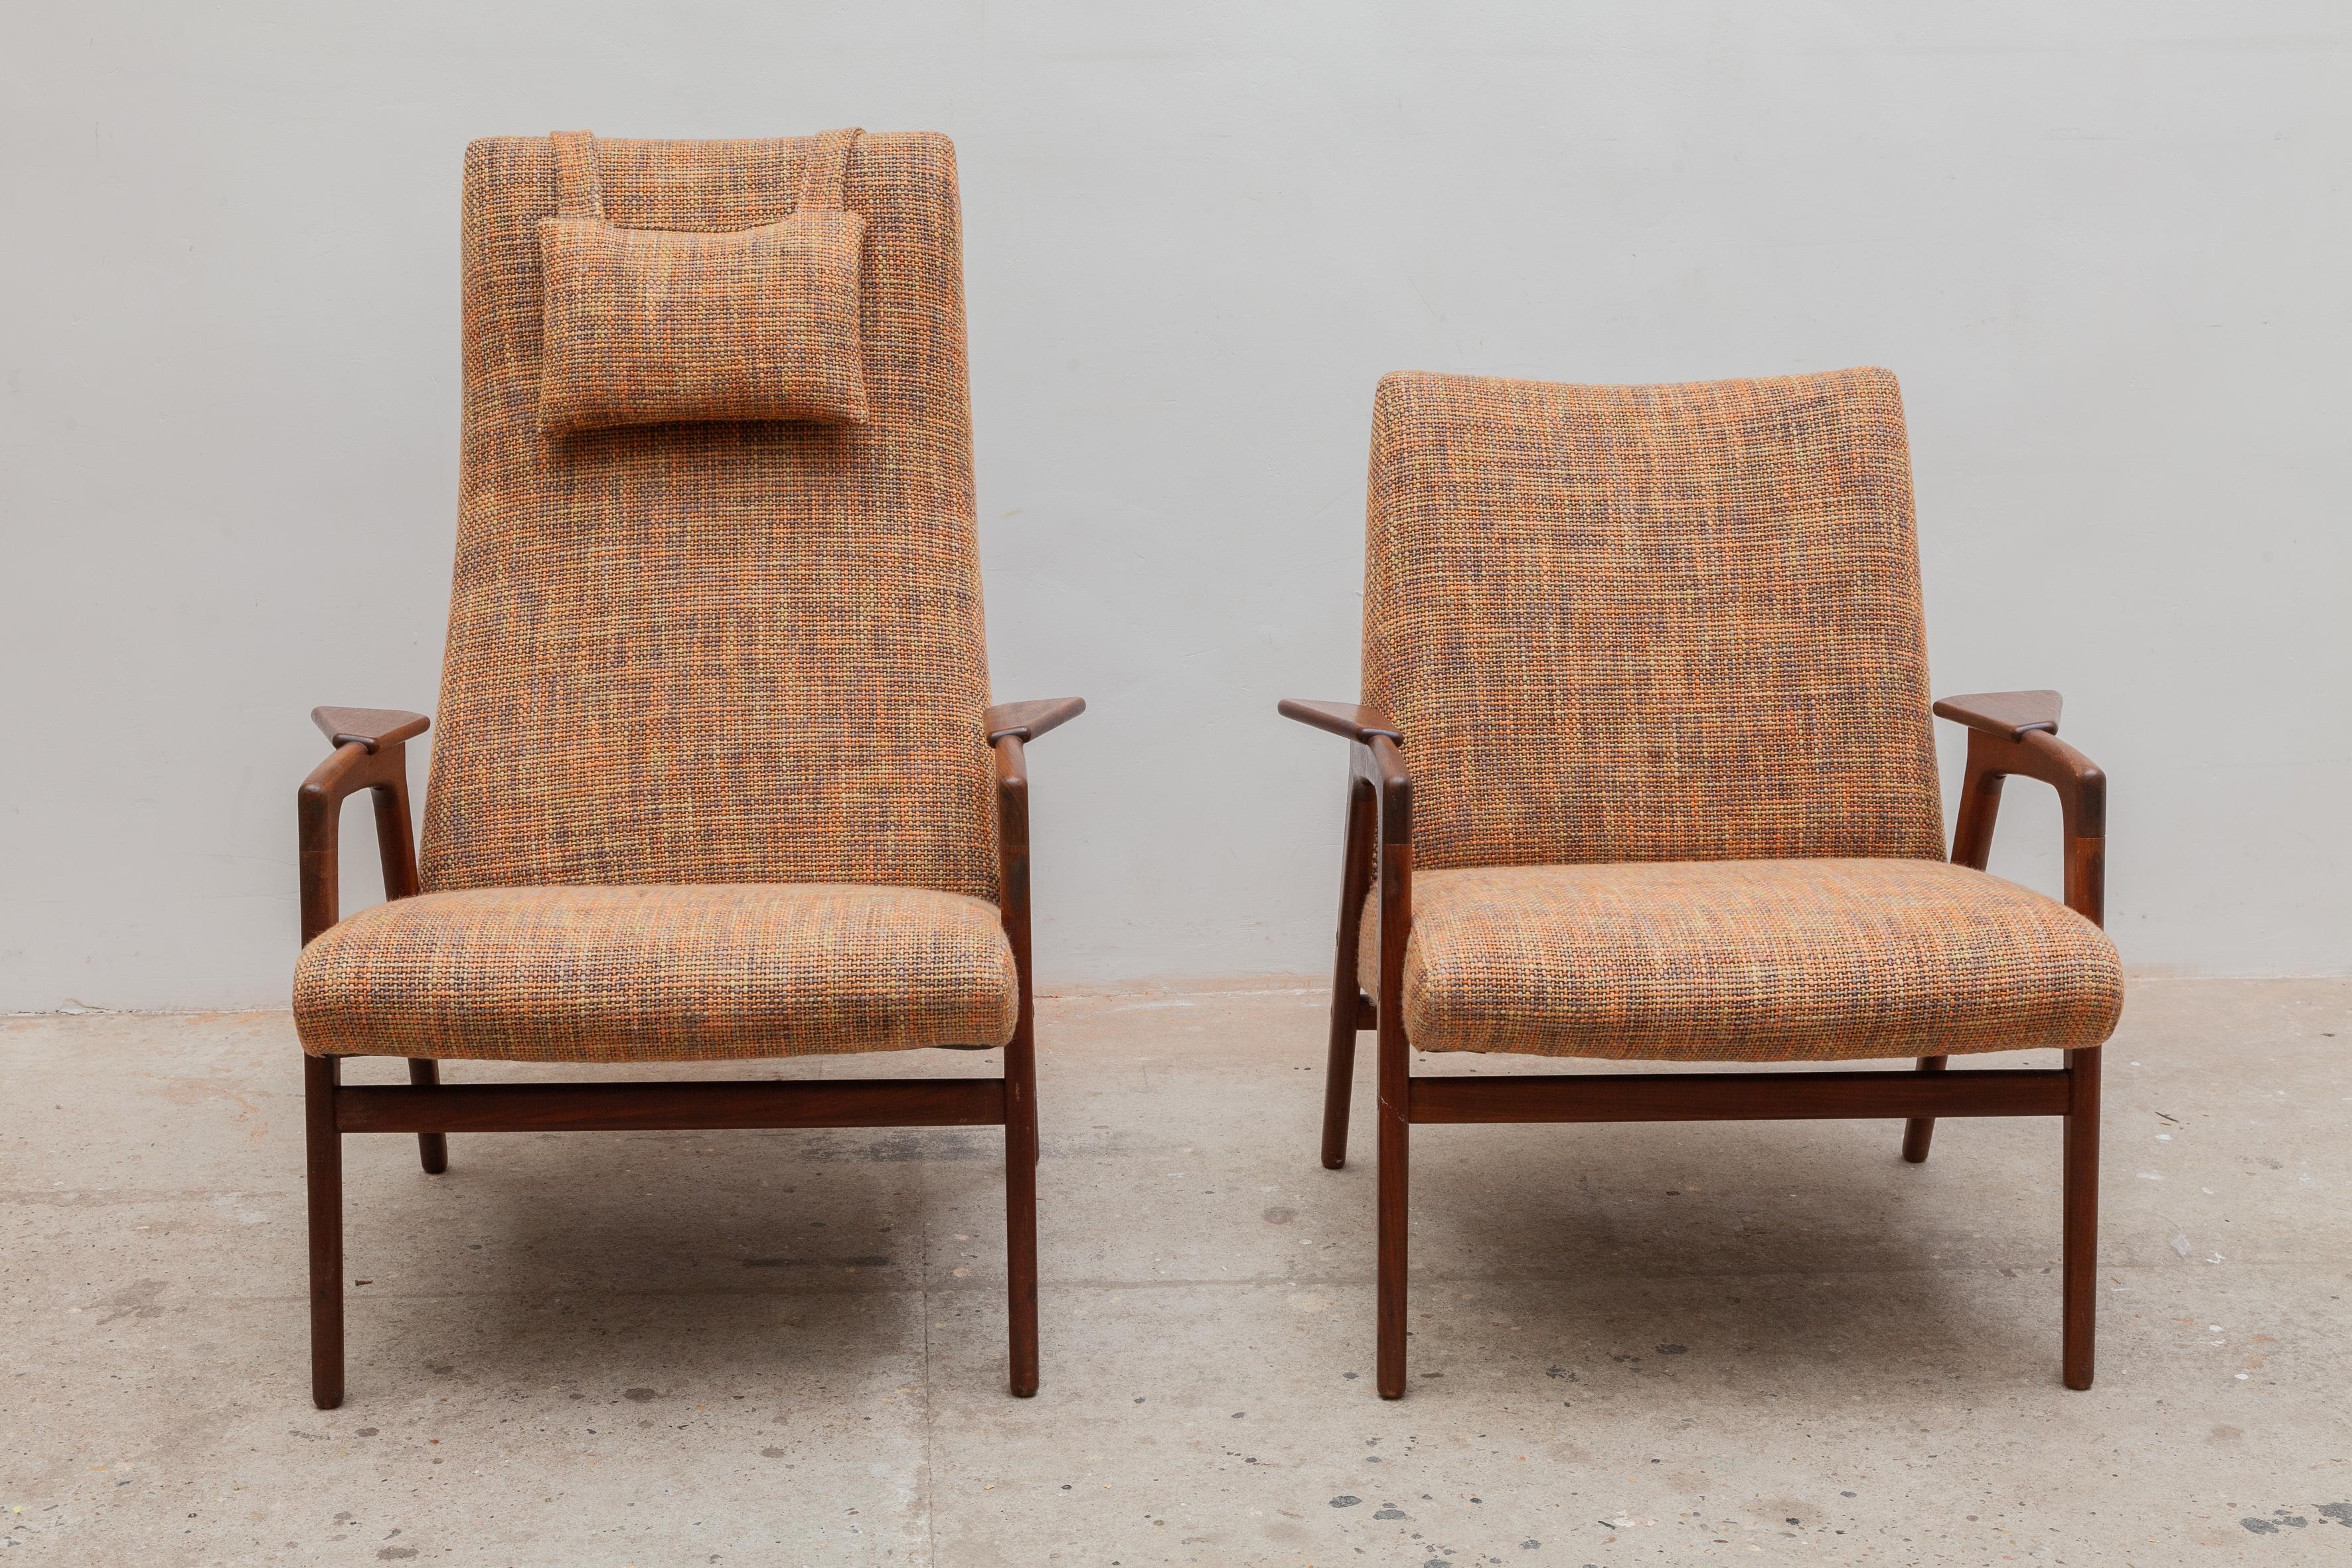 Vintage midcentury set of high and low lounge chairs by Yngve Ekström for the manufacture Pastoe. Elegant teak frame with new melange wool woven upholstery.

Dimensions: Tall chair: 70 W x 95 H x 70 D cm, short chair: 70 W x 72 H x 65 D cm, seat 40